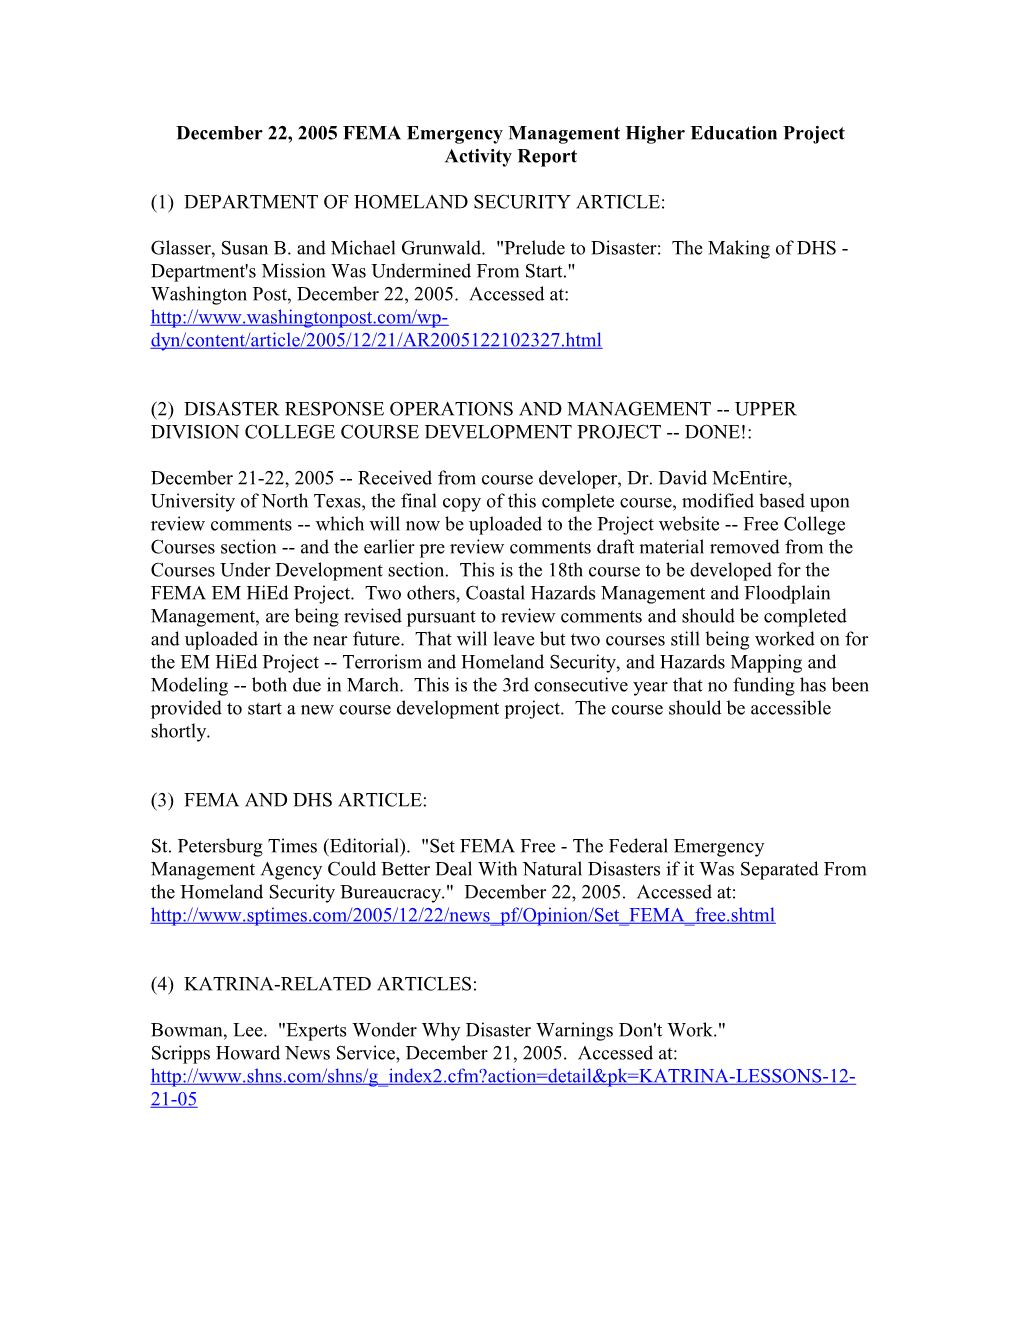 December 22, 2005 FEMA Emergency Management Higher Education Project Activity Report